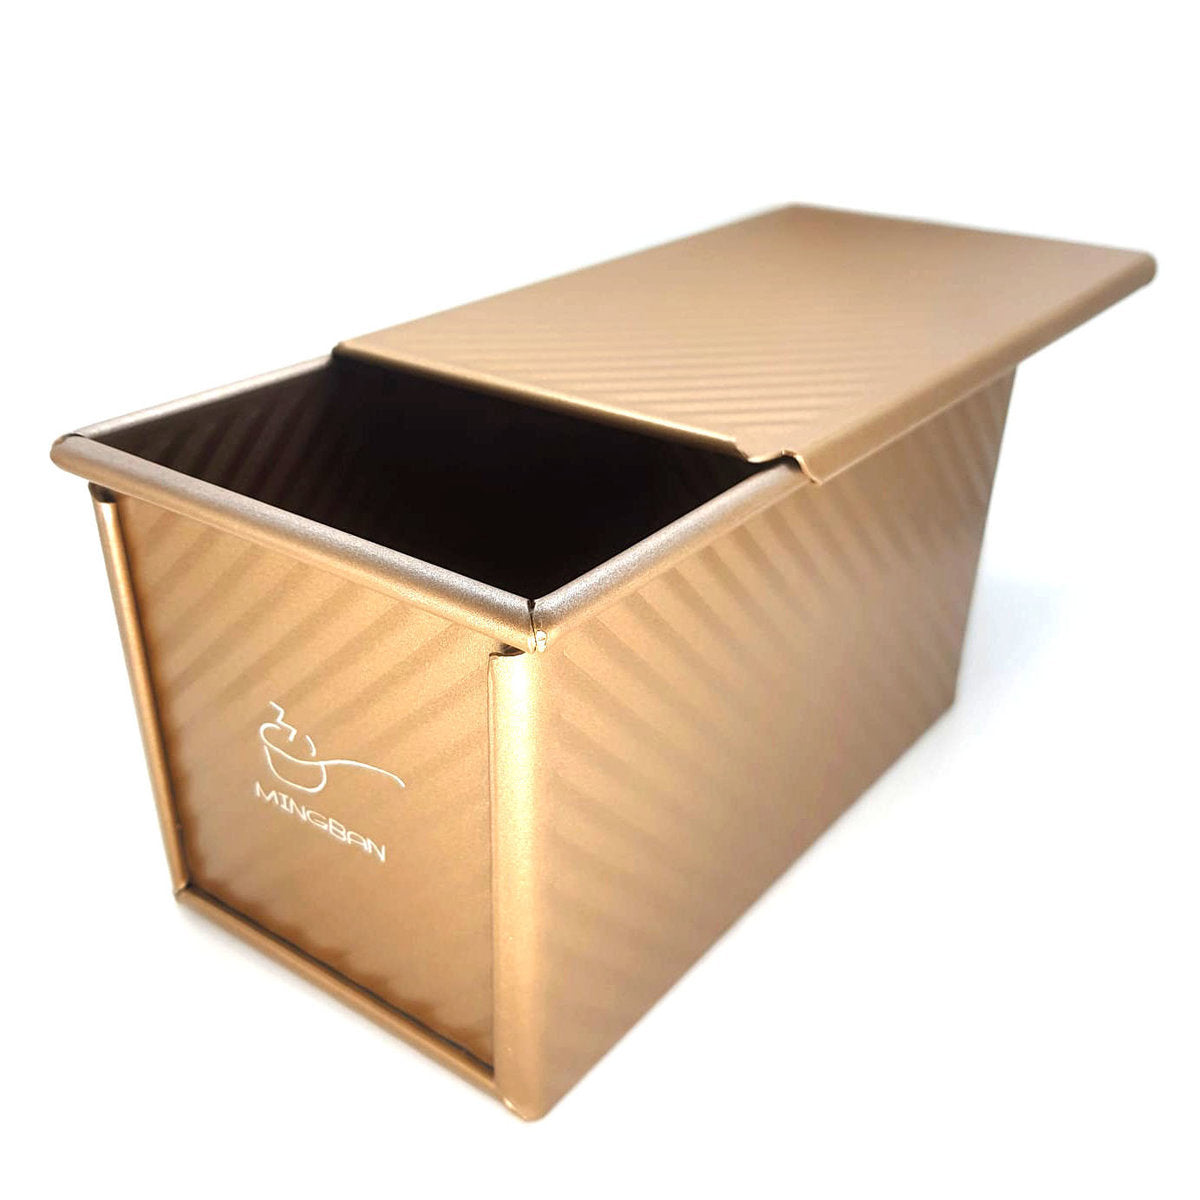 450g non-stick coated toast box with lid (gold/anodized/corrugated)